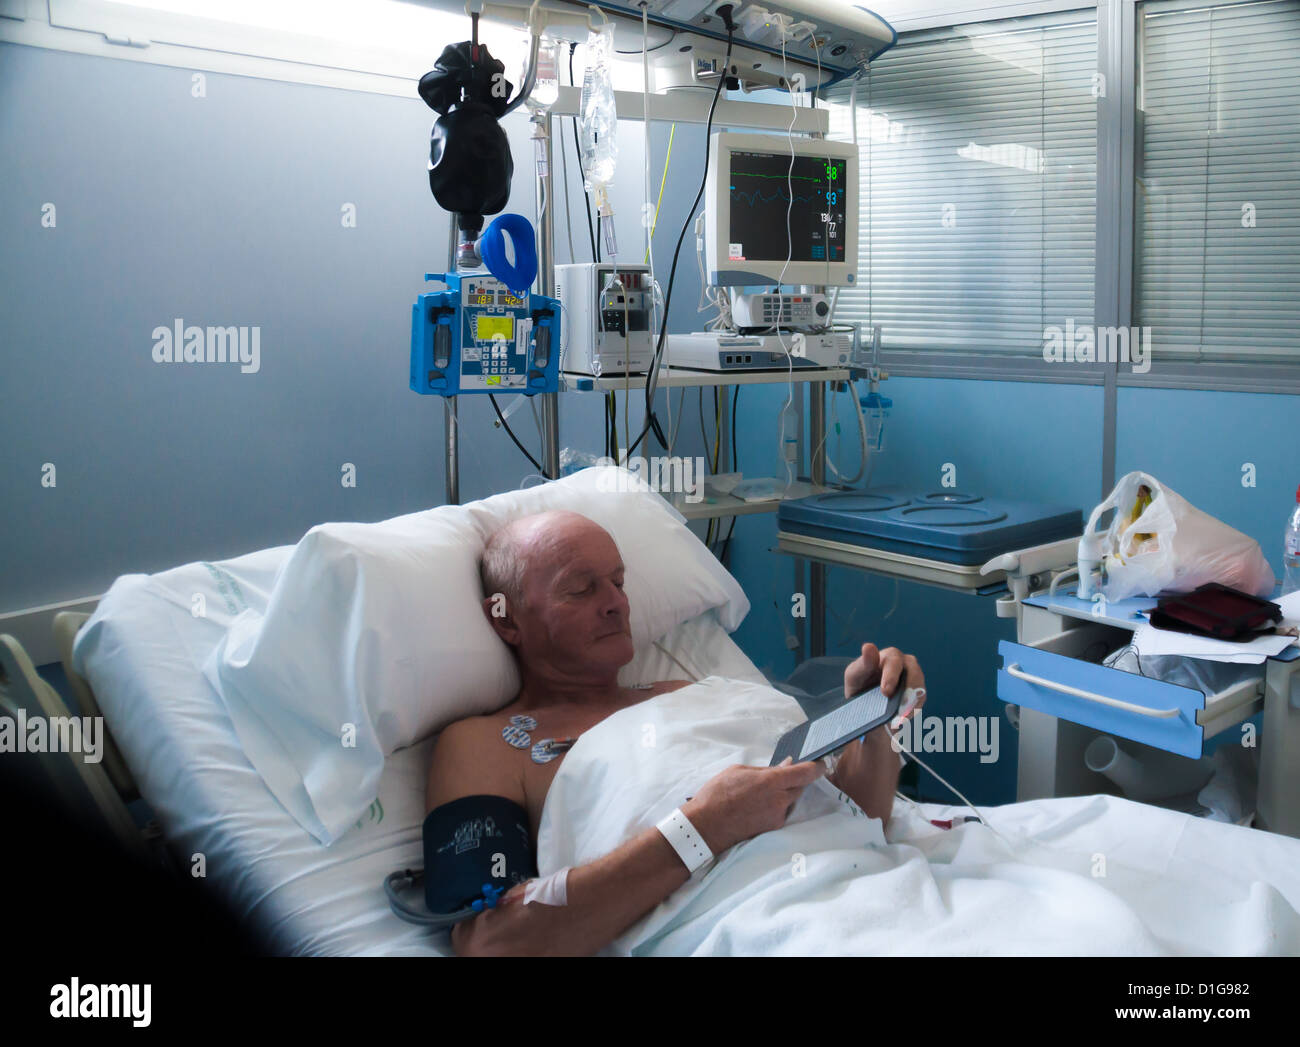 Patient in intensive care, hospital Stock Photo